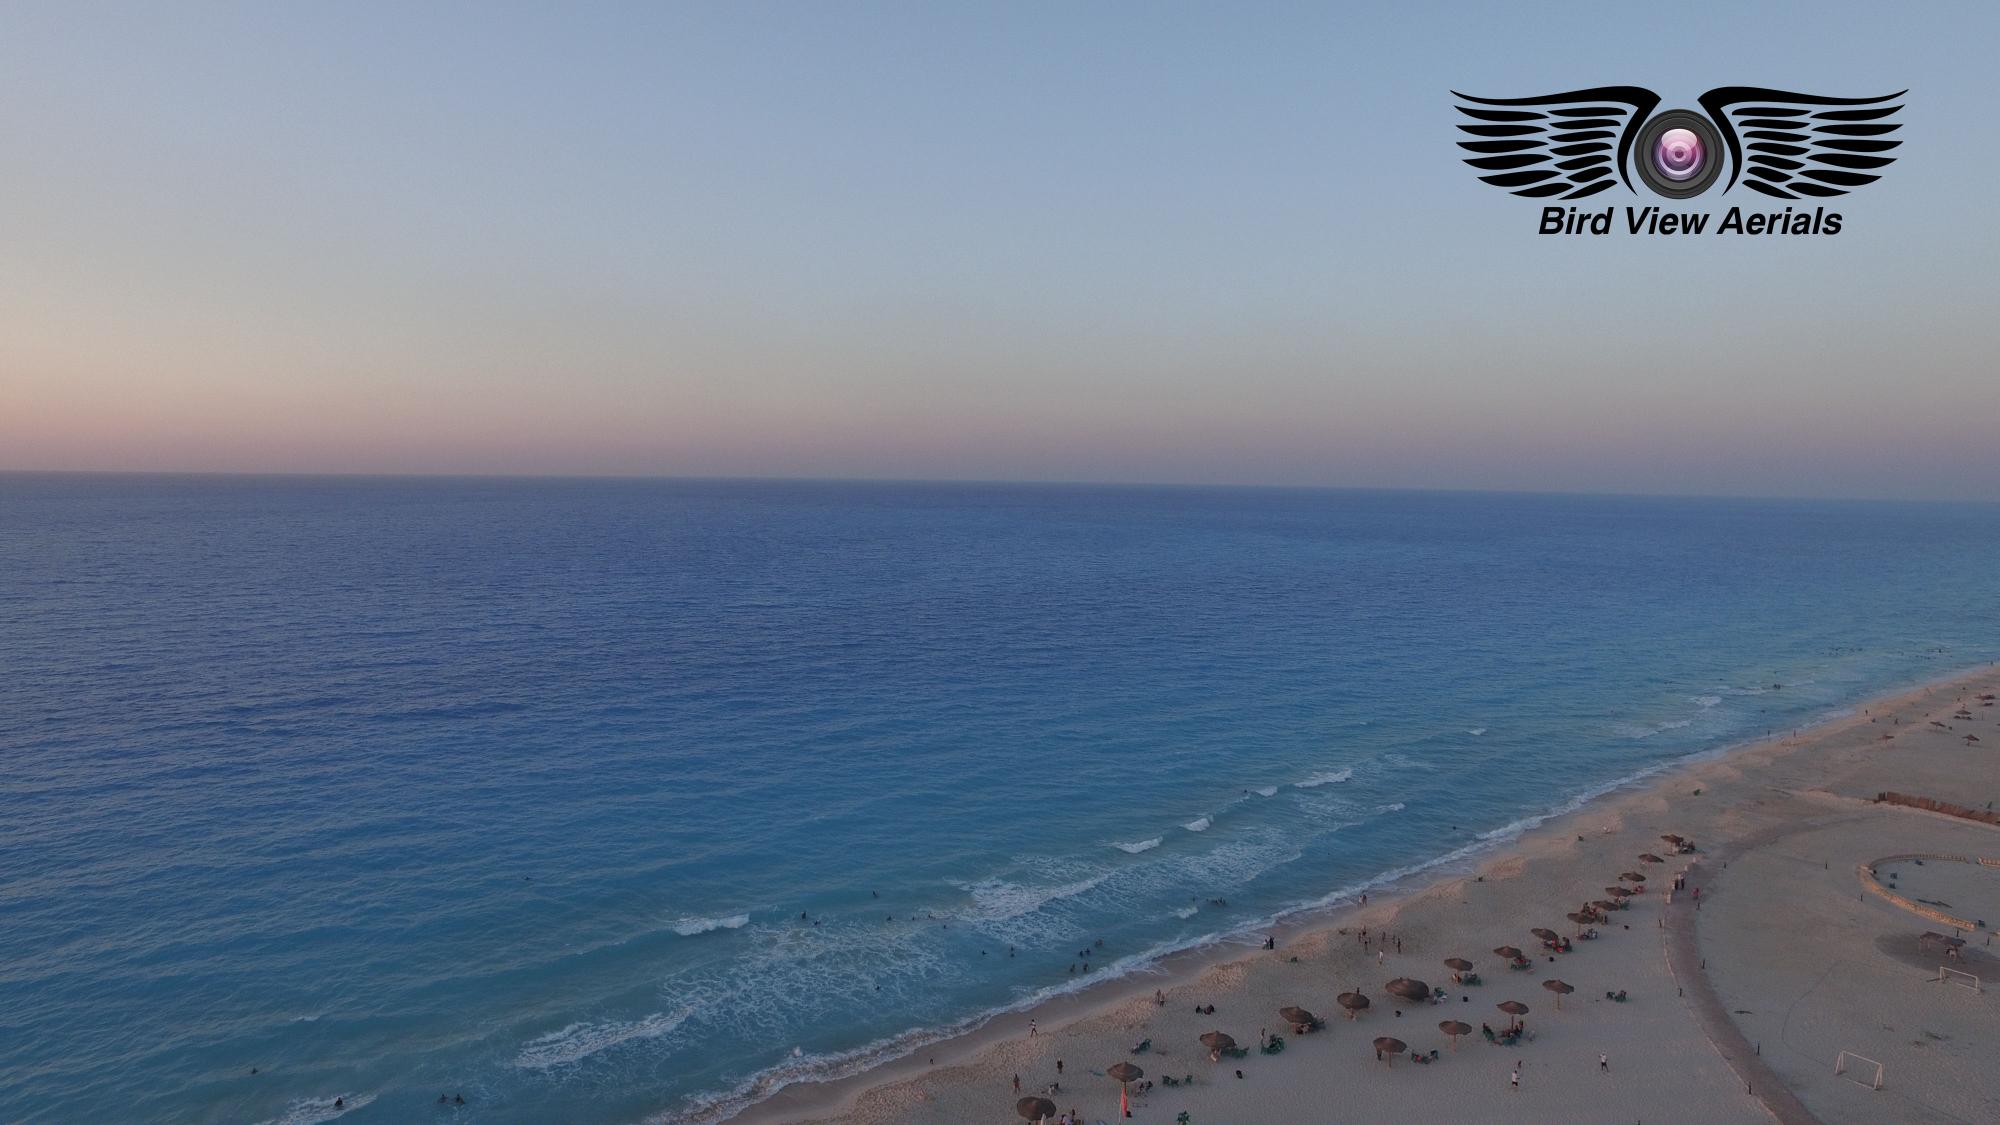 Bird View Aerials exhibition at AUC's Photographic Gallery by Mohamed Abdel-Razek '14